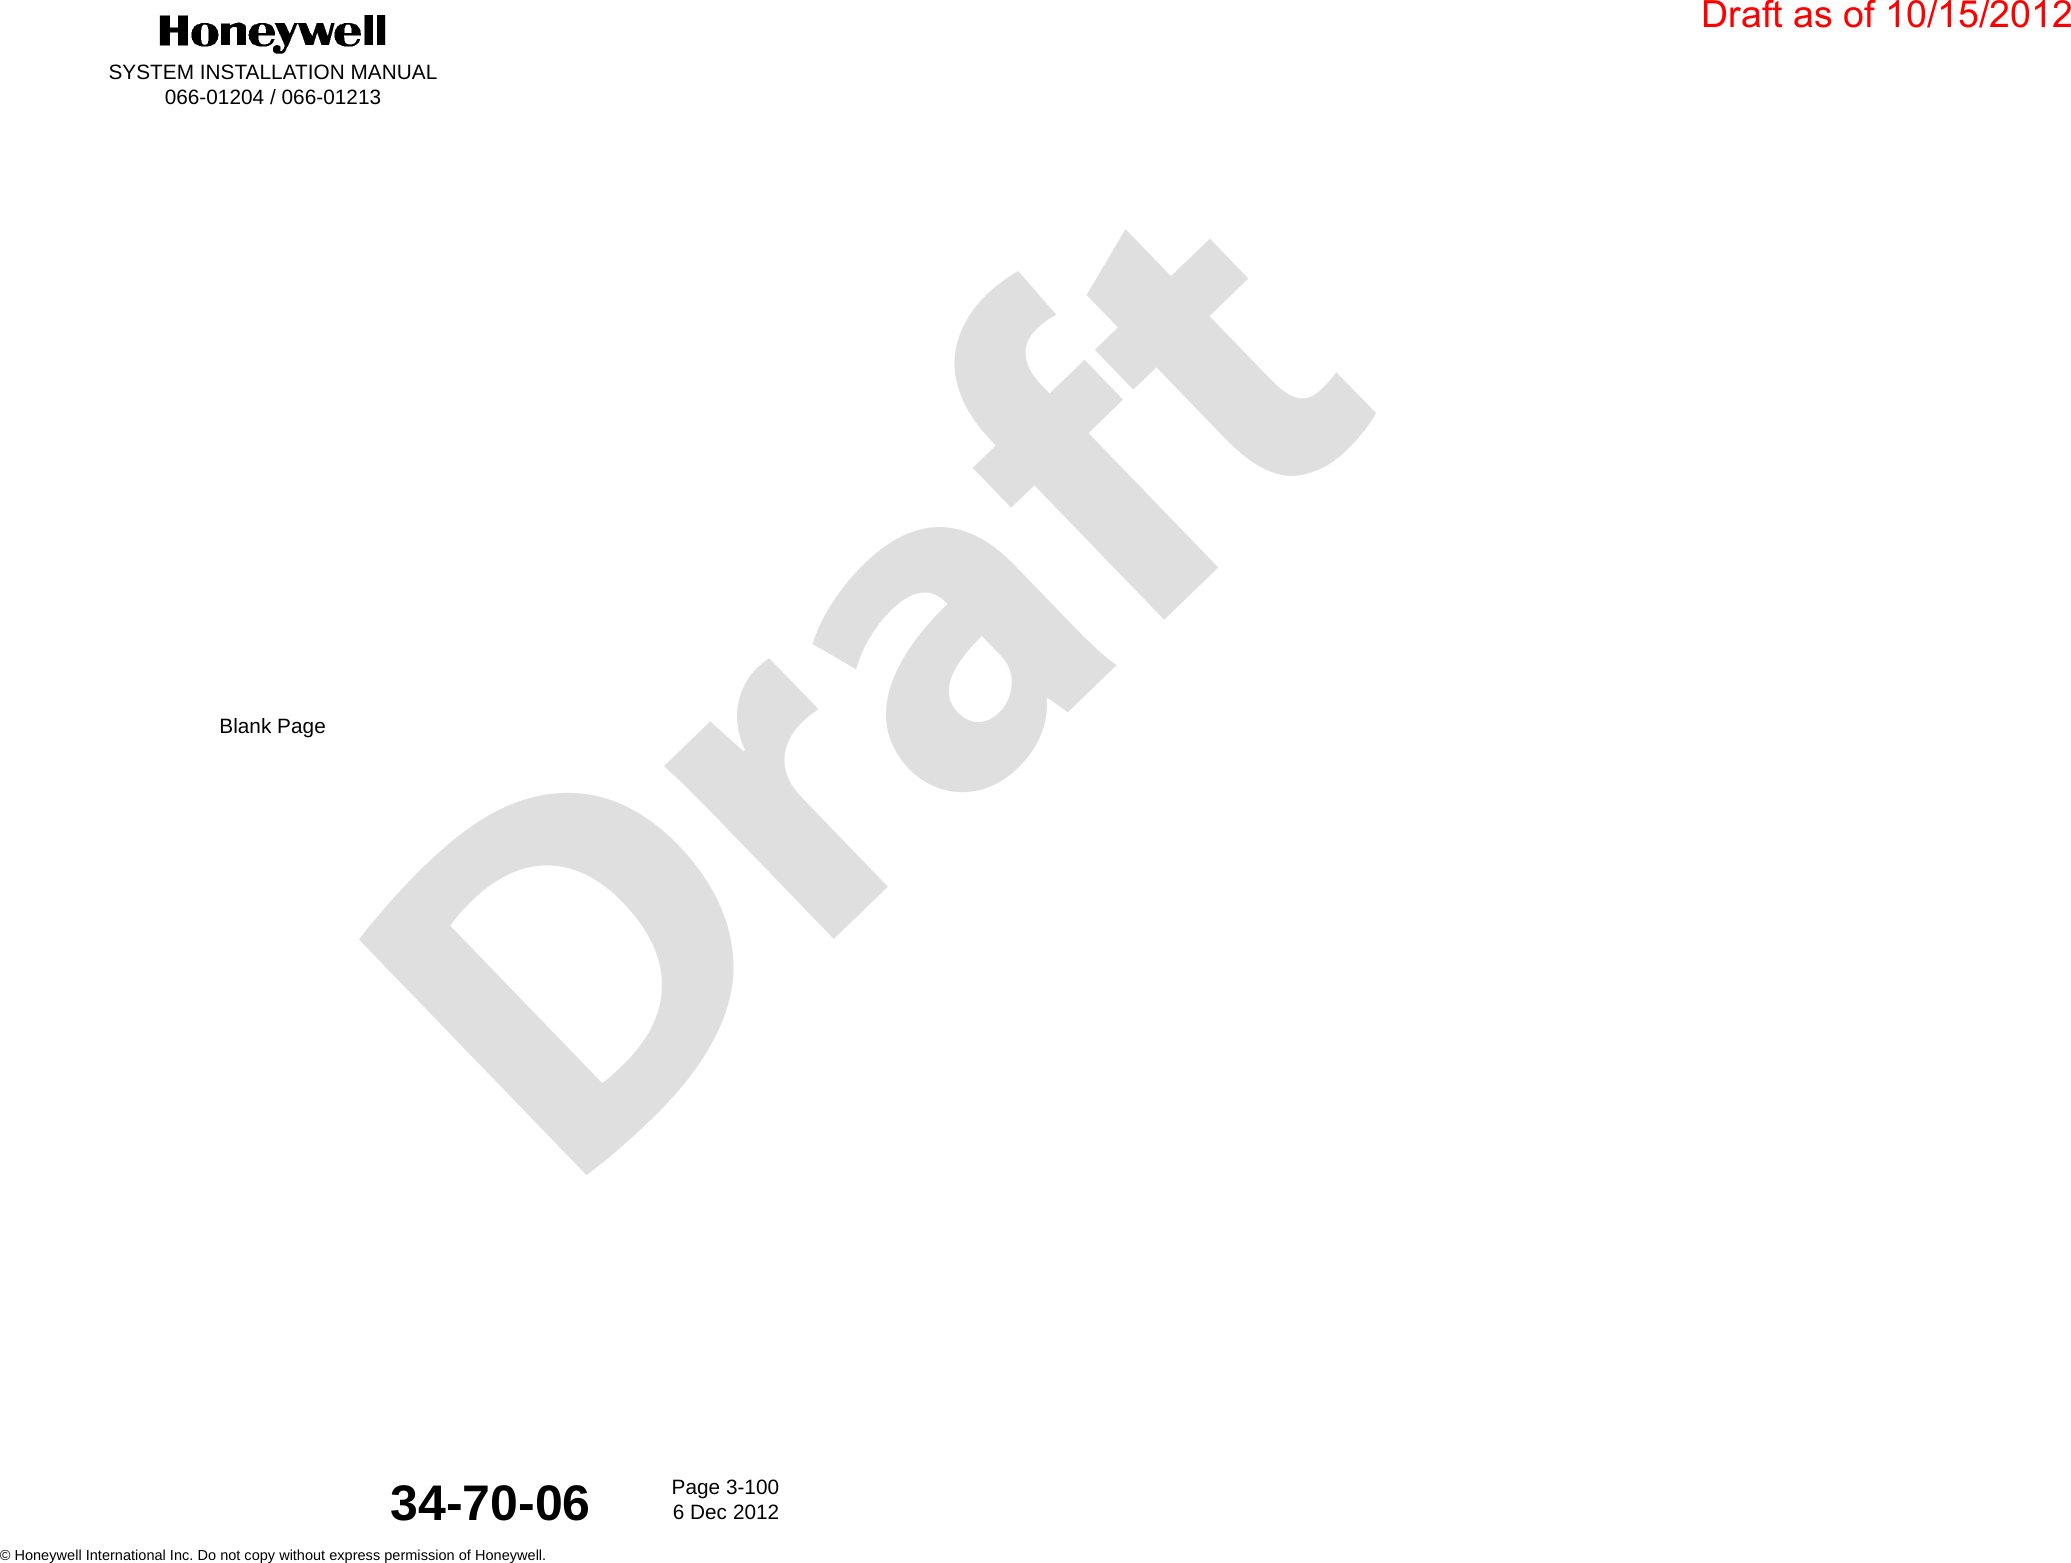 DraftSYSTEM INSTALLATION MANUAL066-01204 / 066-01213Page 3-1006 Dec 2012© Honeywell International Inc. Do not copy without express permission of Honeywell.34-70-06Blank PageDraft as of 10/15/2012